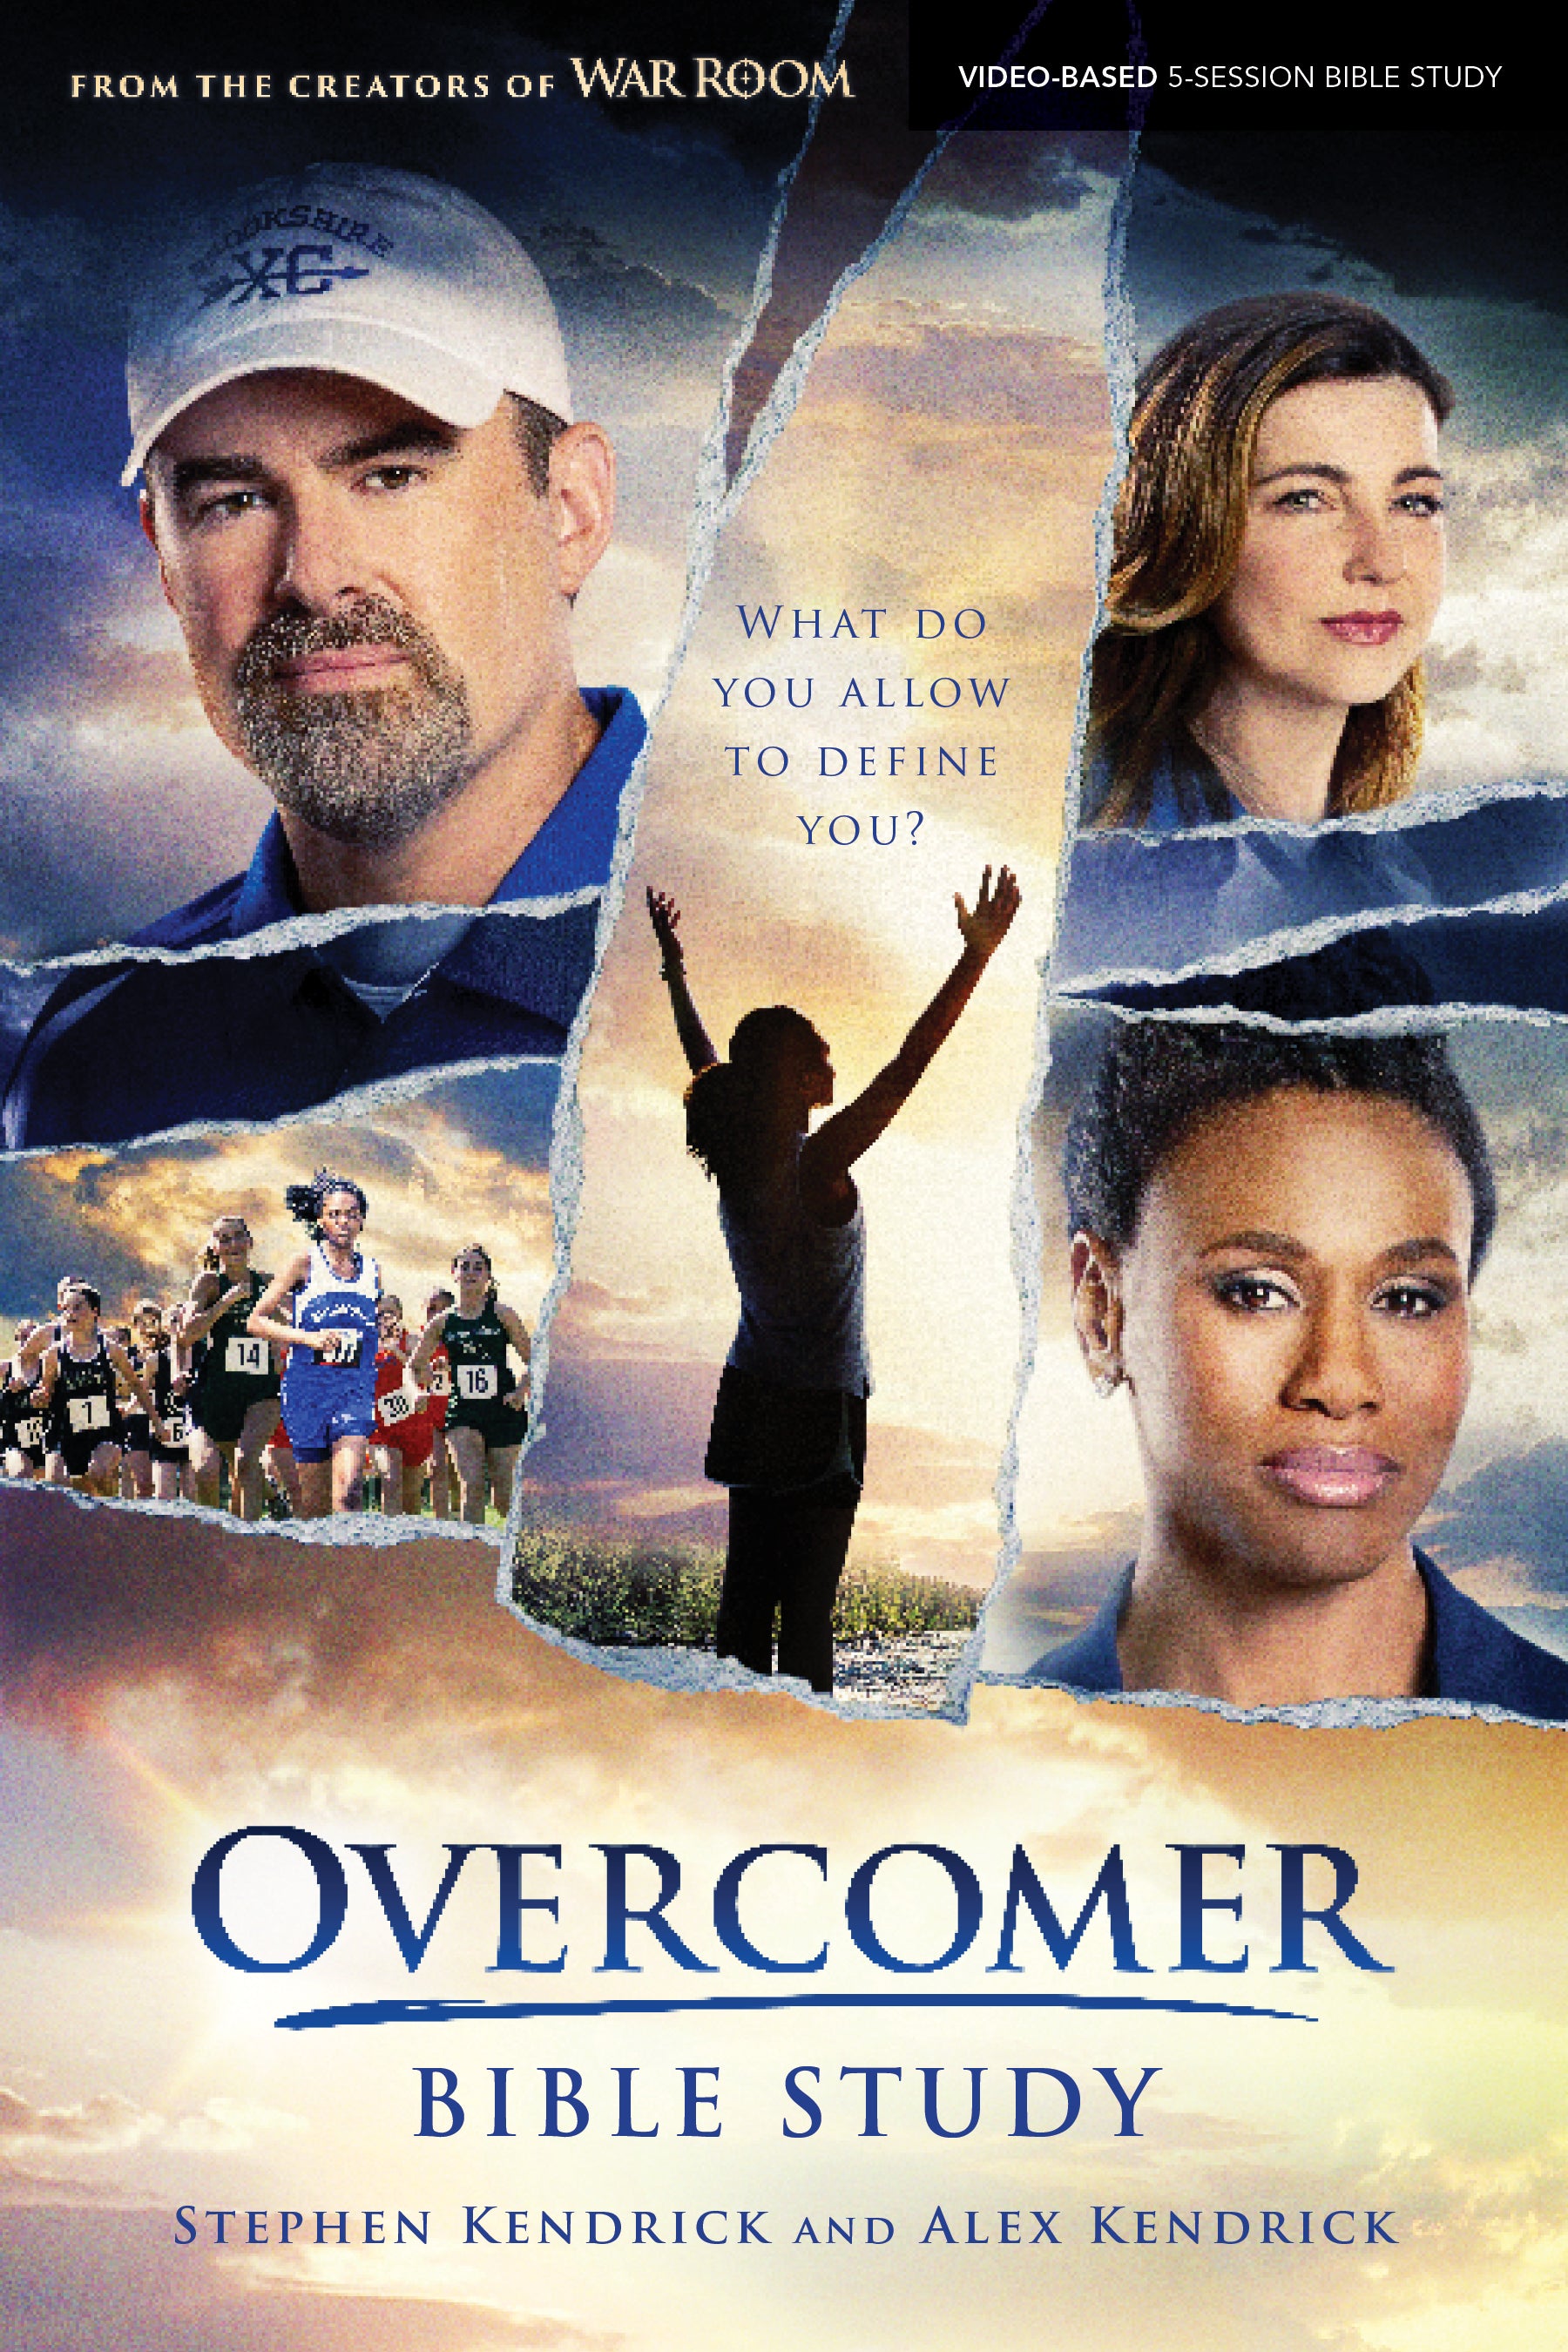 Image of Overcomer - Bible Study Book other